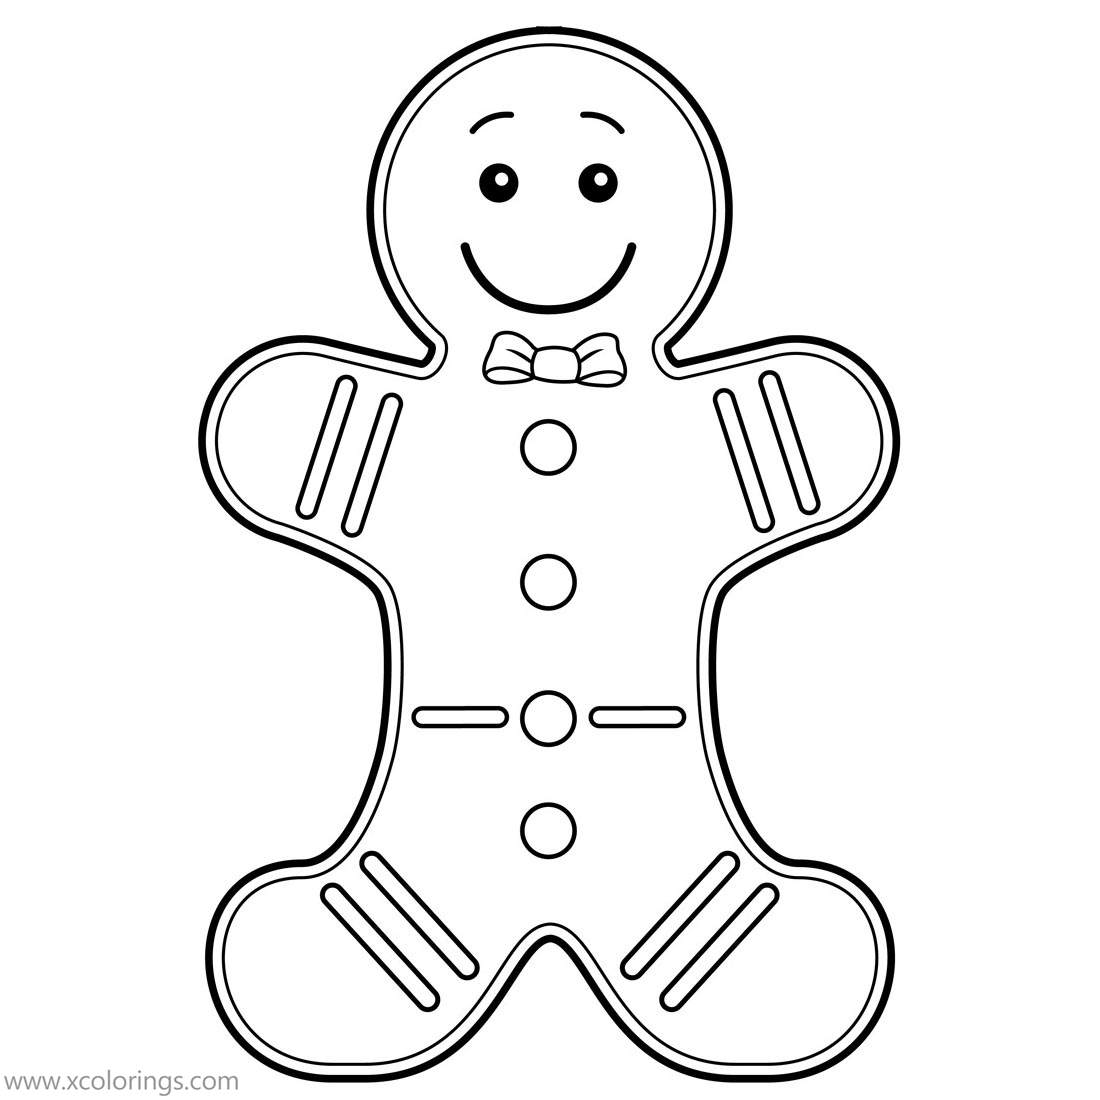 Free Gingerbread Man Template Coloring Pages printable